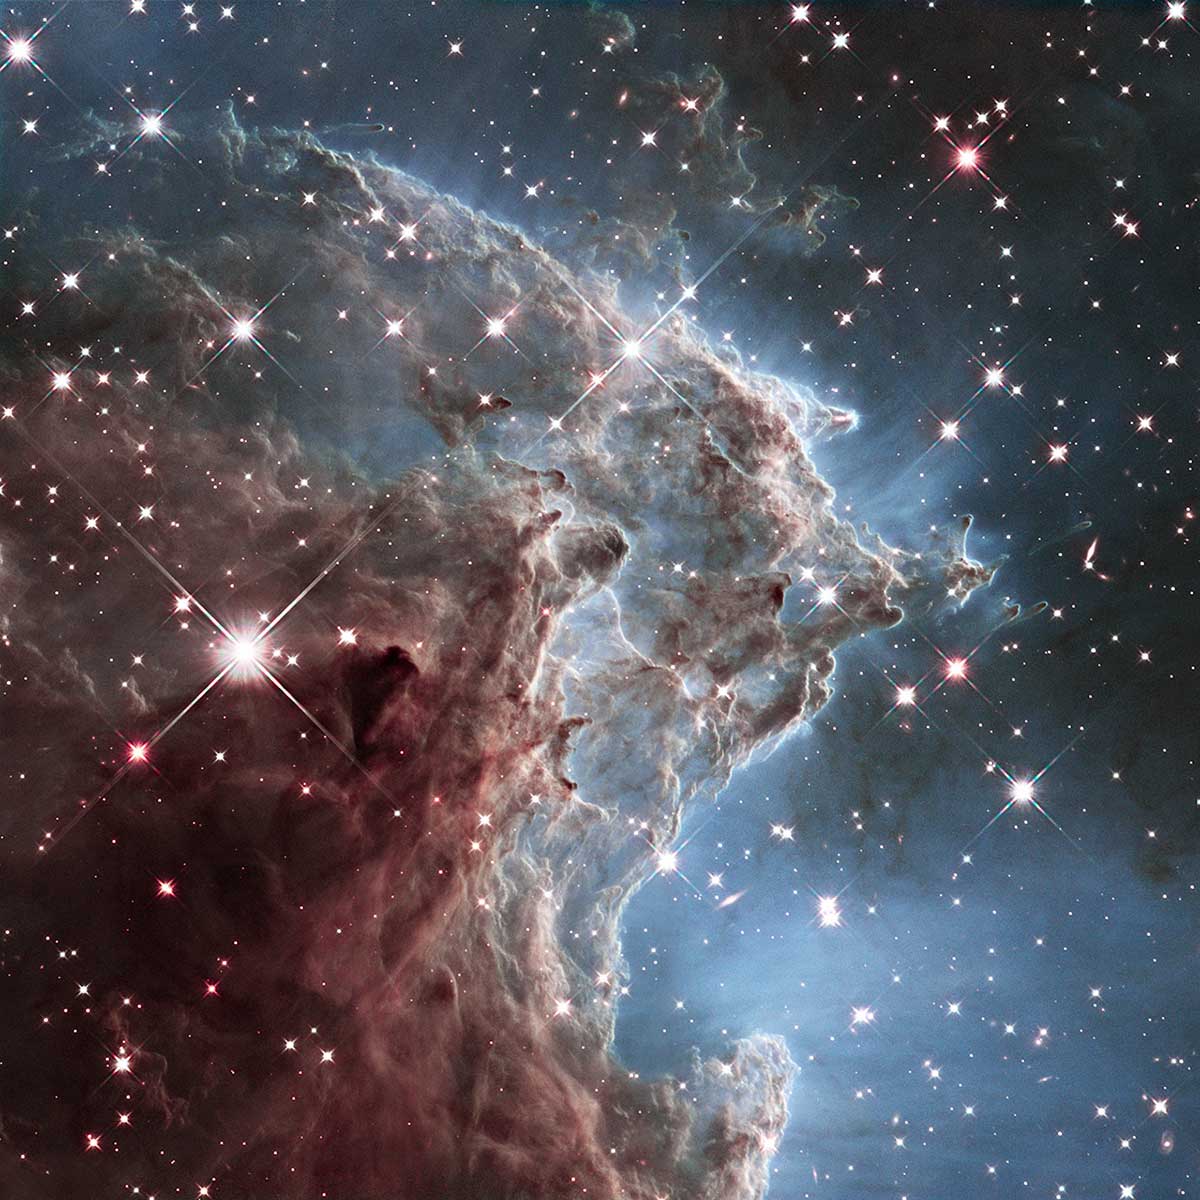 An infrared image of a small portion of the Monkey Head Nebula (also known as NGC 2174 and Sharpless Sh2-252) captured by the Hubble telescope, released on March 17, 2014. The nebula is a star-forming region that hosts dusky dust clouds silhouetted against glowing gas.NASA/ESA/Hubble Heritage Team (STScI/AURA)